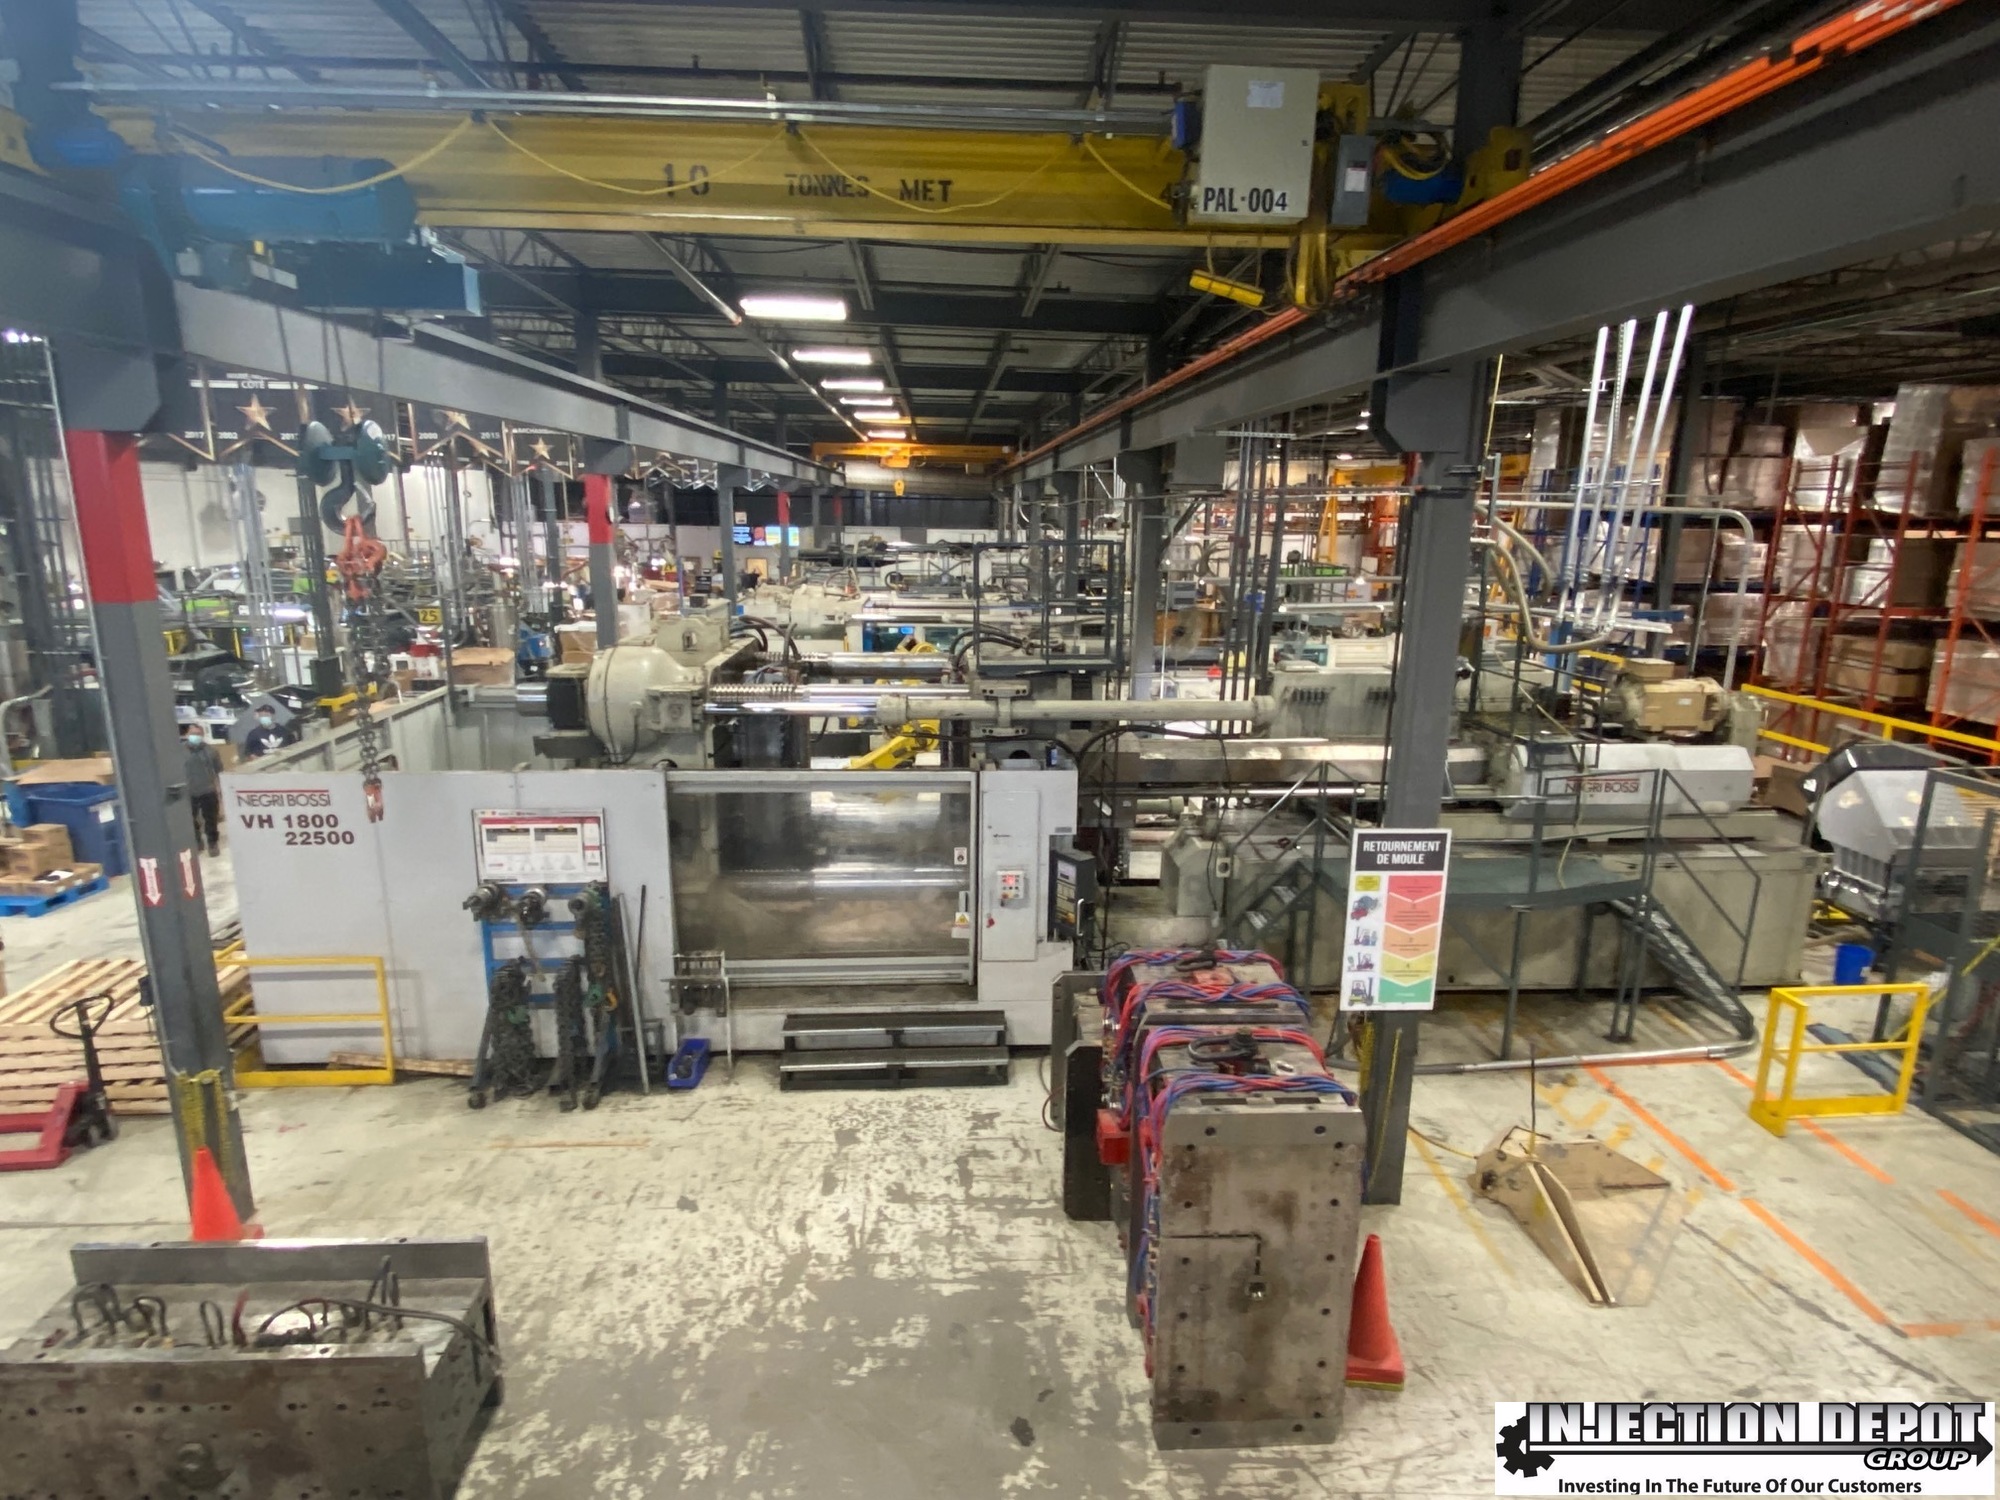 2004 NEGRI BOSSI VH1800-22500 Horizontal Injection Moulding Machines | INJECTION DEPOT GROUP